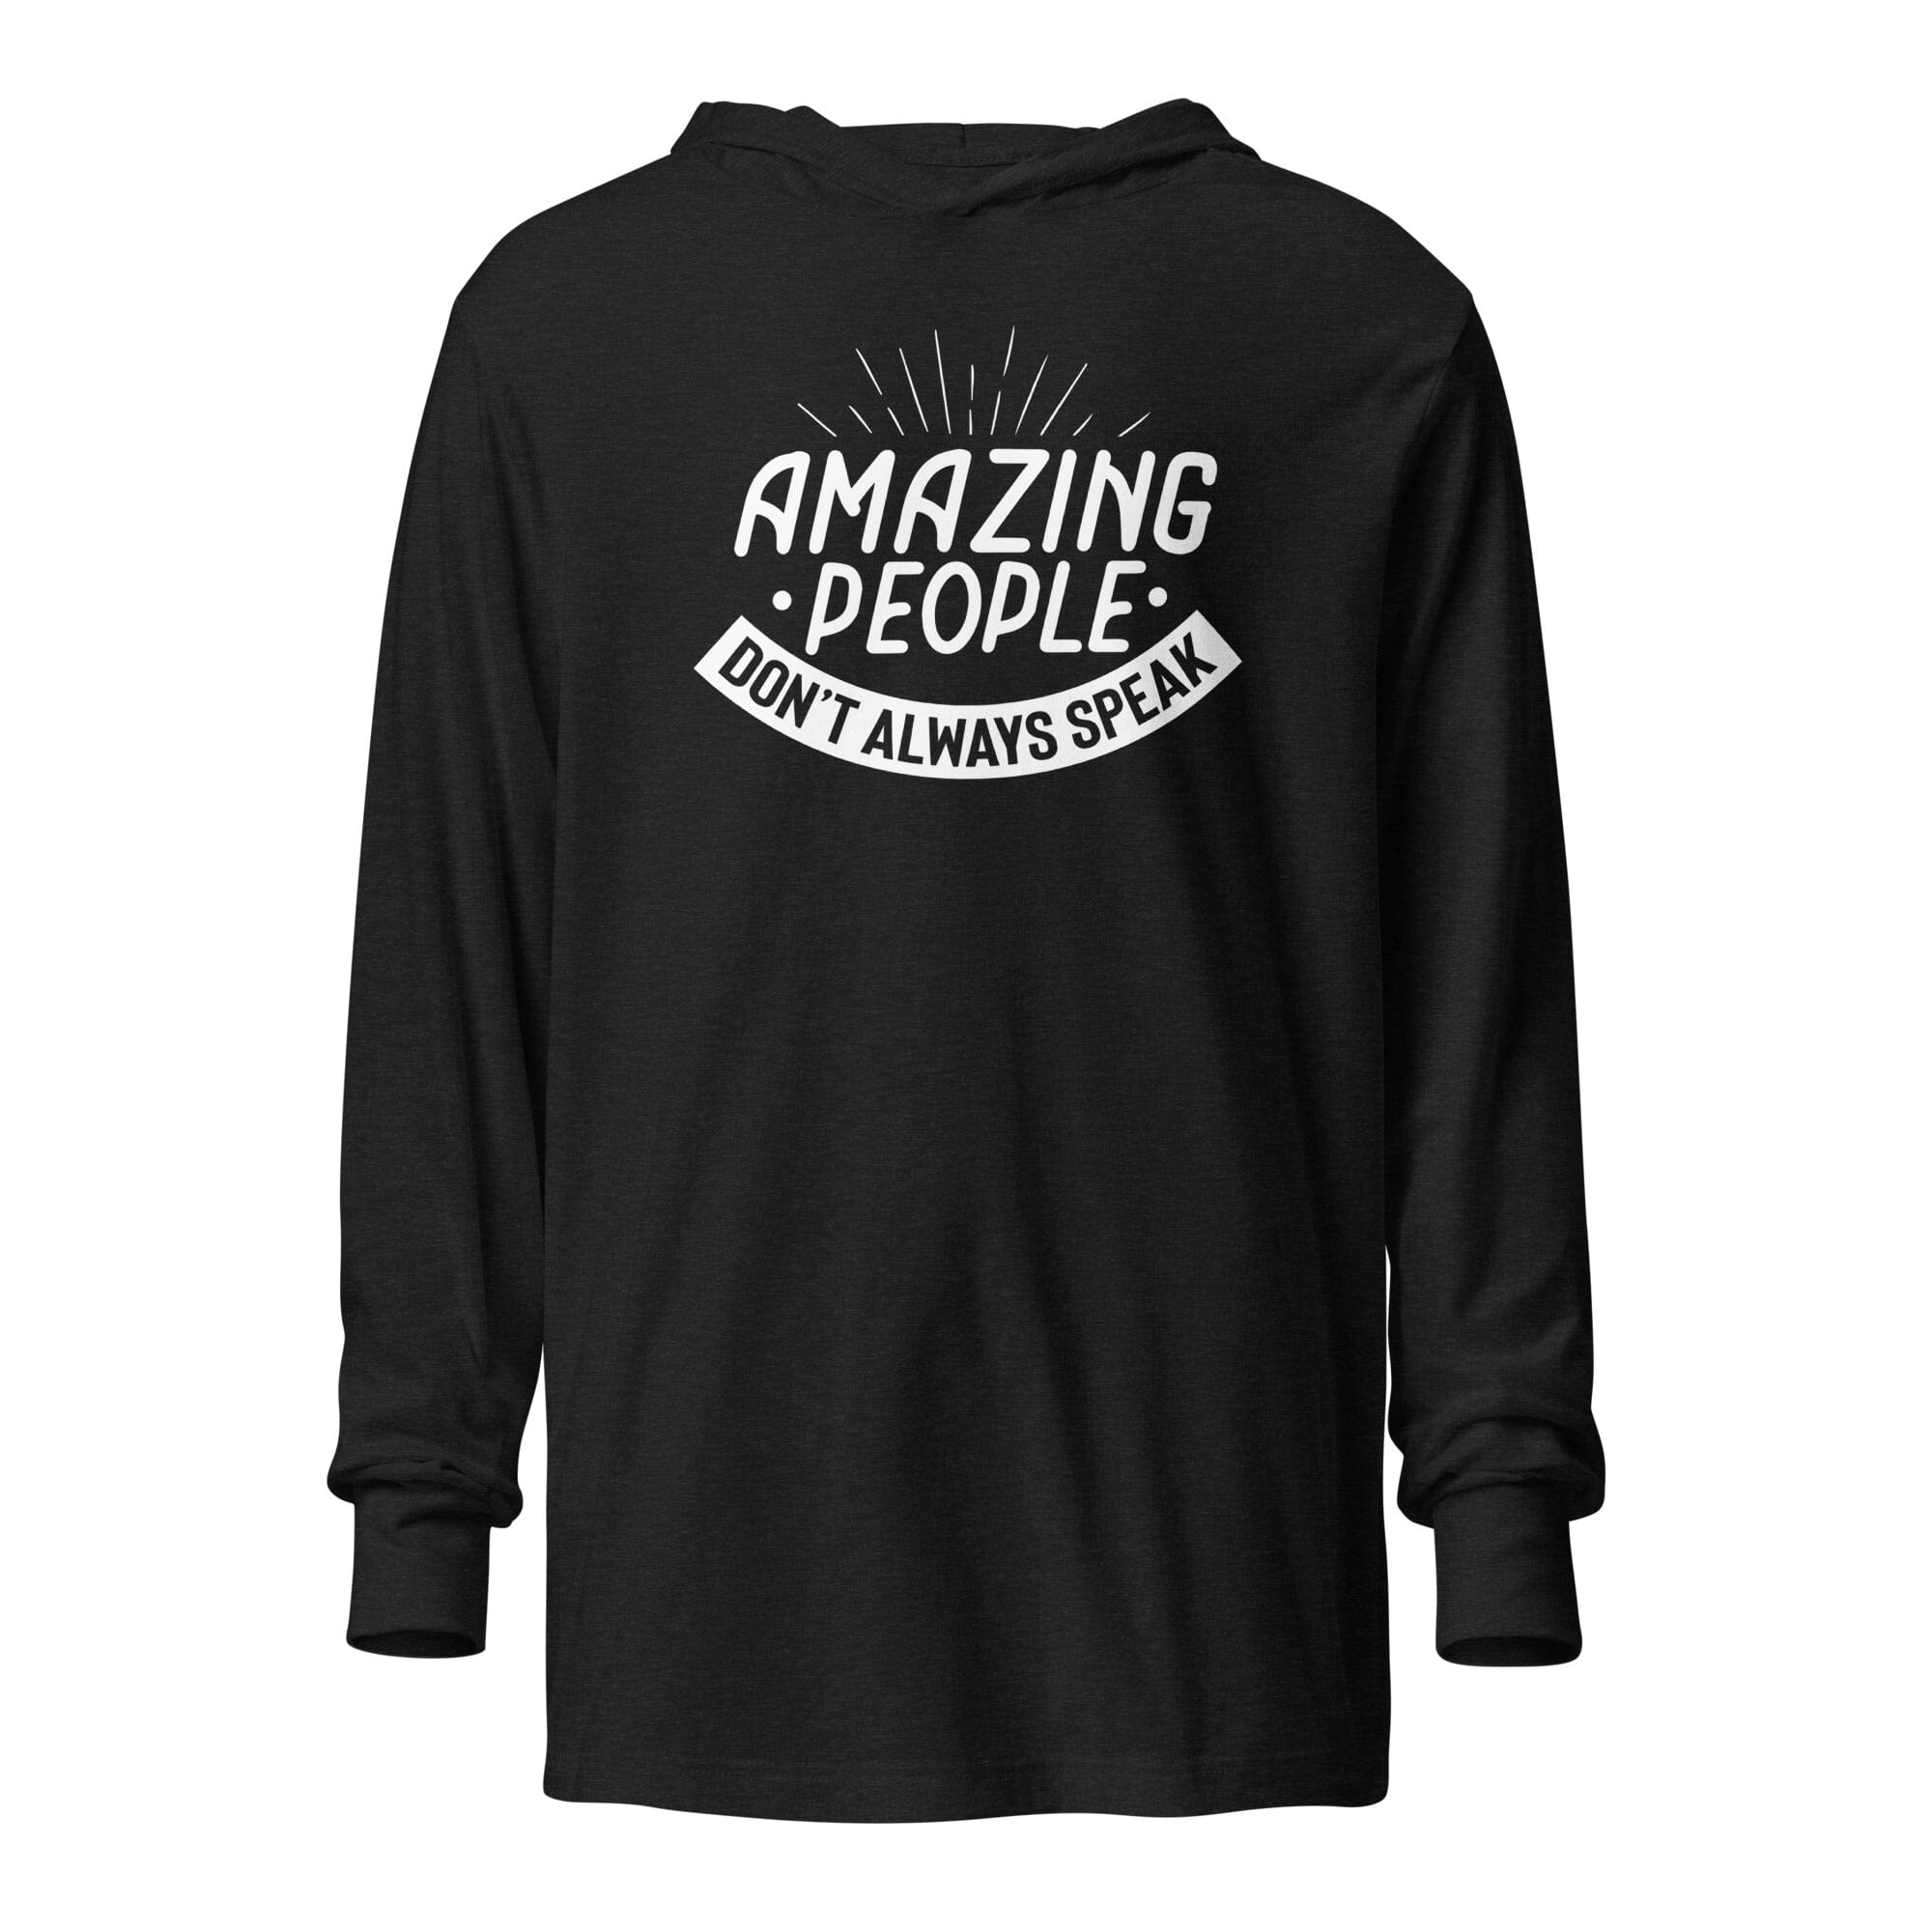 Amazing People Don't Always Speak Unisex Hooded long-sleeve tee The Autistic Innovator Charcoal-Black Triblend XS 